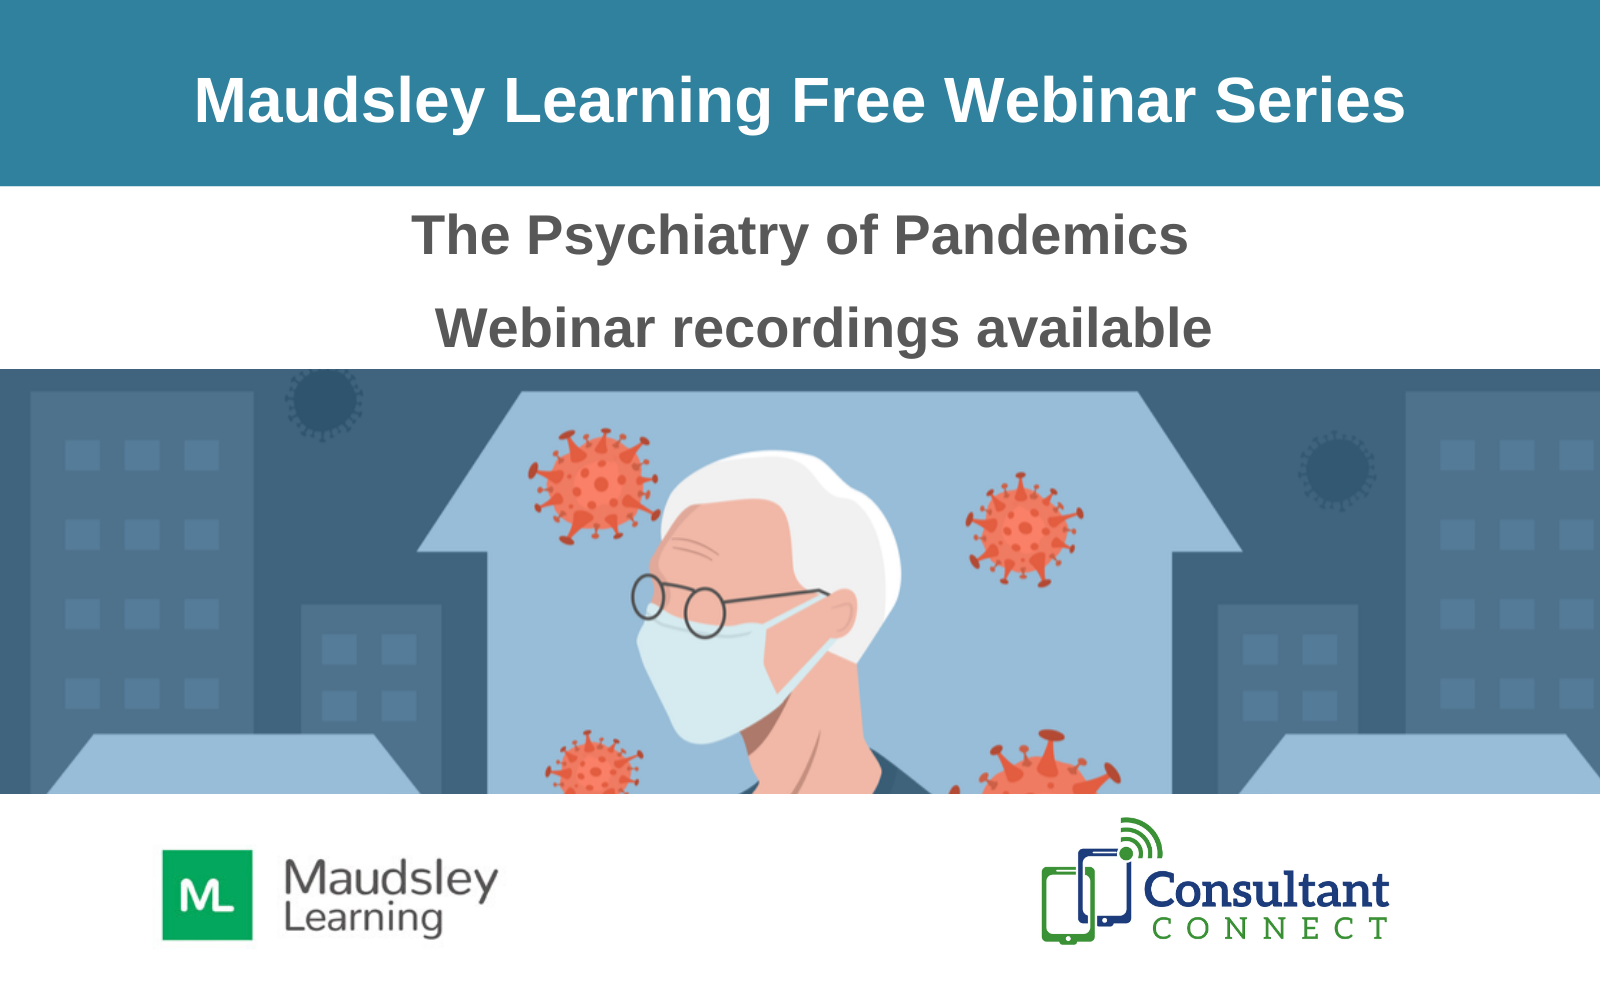 Maudsley Learning Webinar Series: The Psychiatry of Pandemics - Consultant Connect